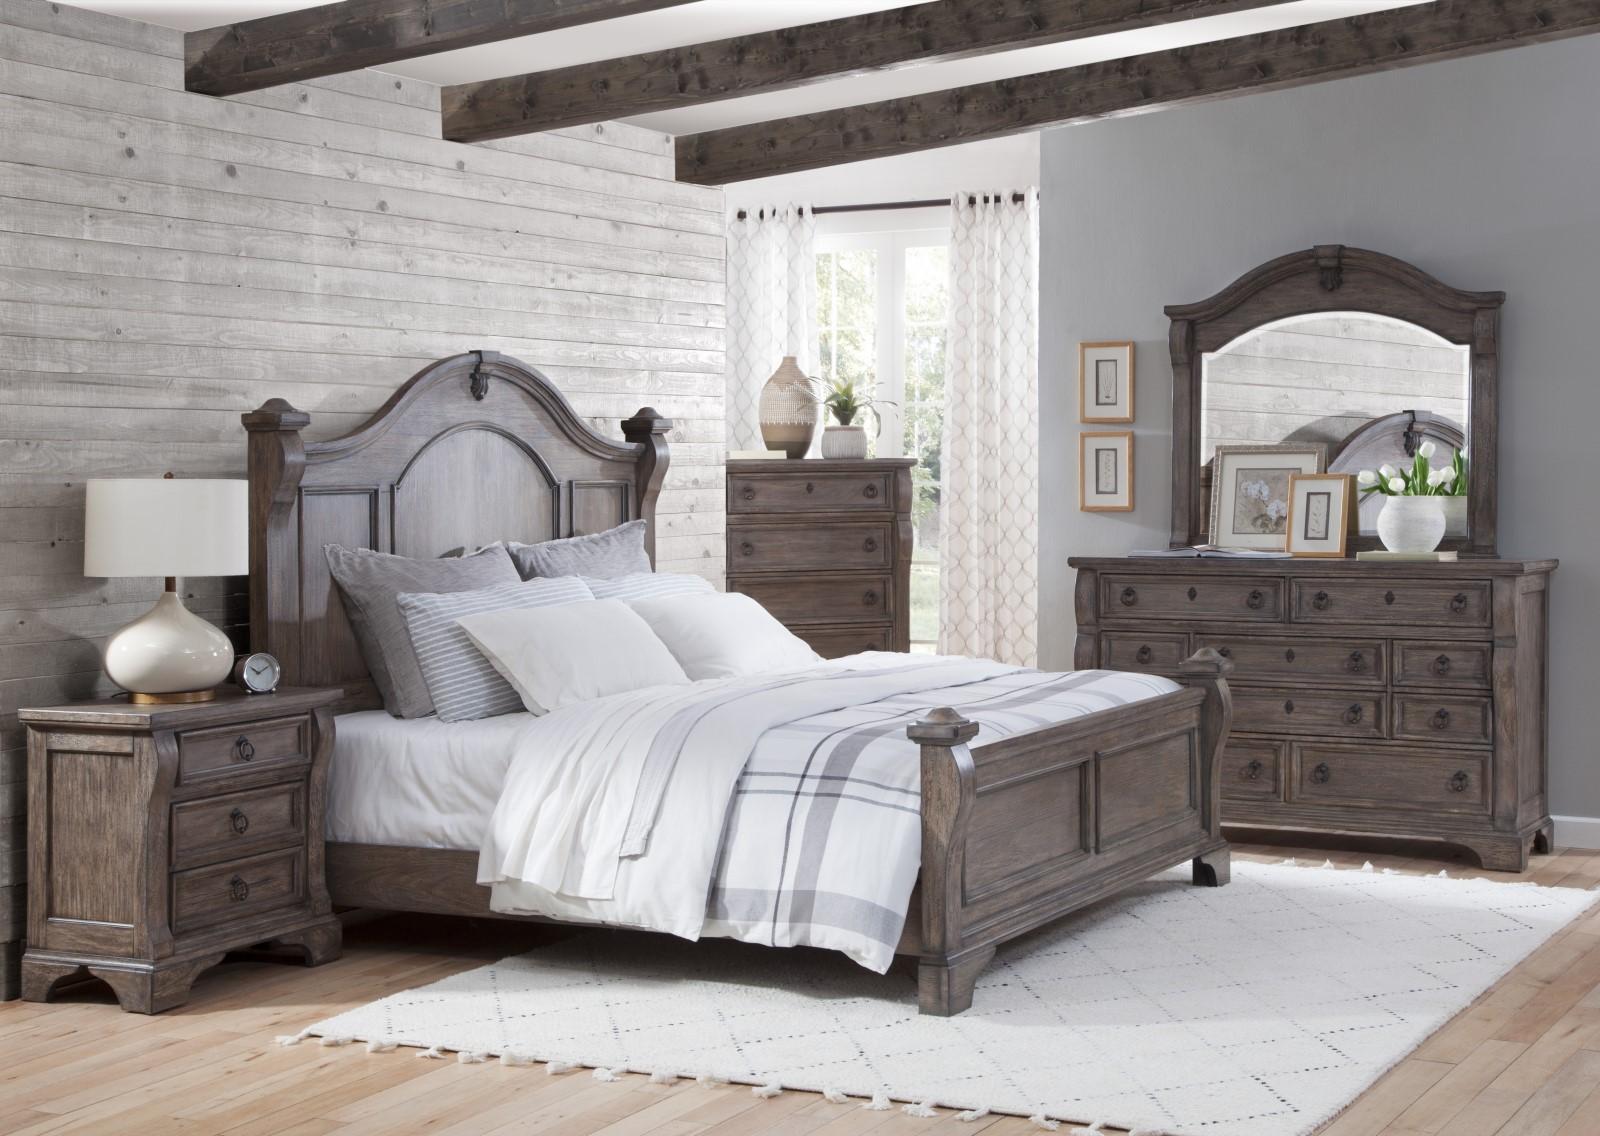 Classic, Traditional, Cottage Poster Bedroom Set HEIRLOOM 2975-50POS 2975-QPOPO-4PC in Charcoal 